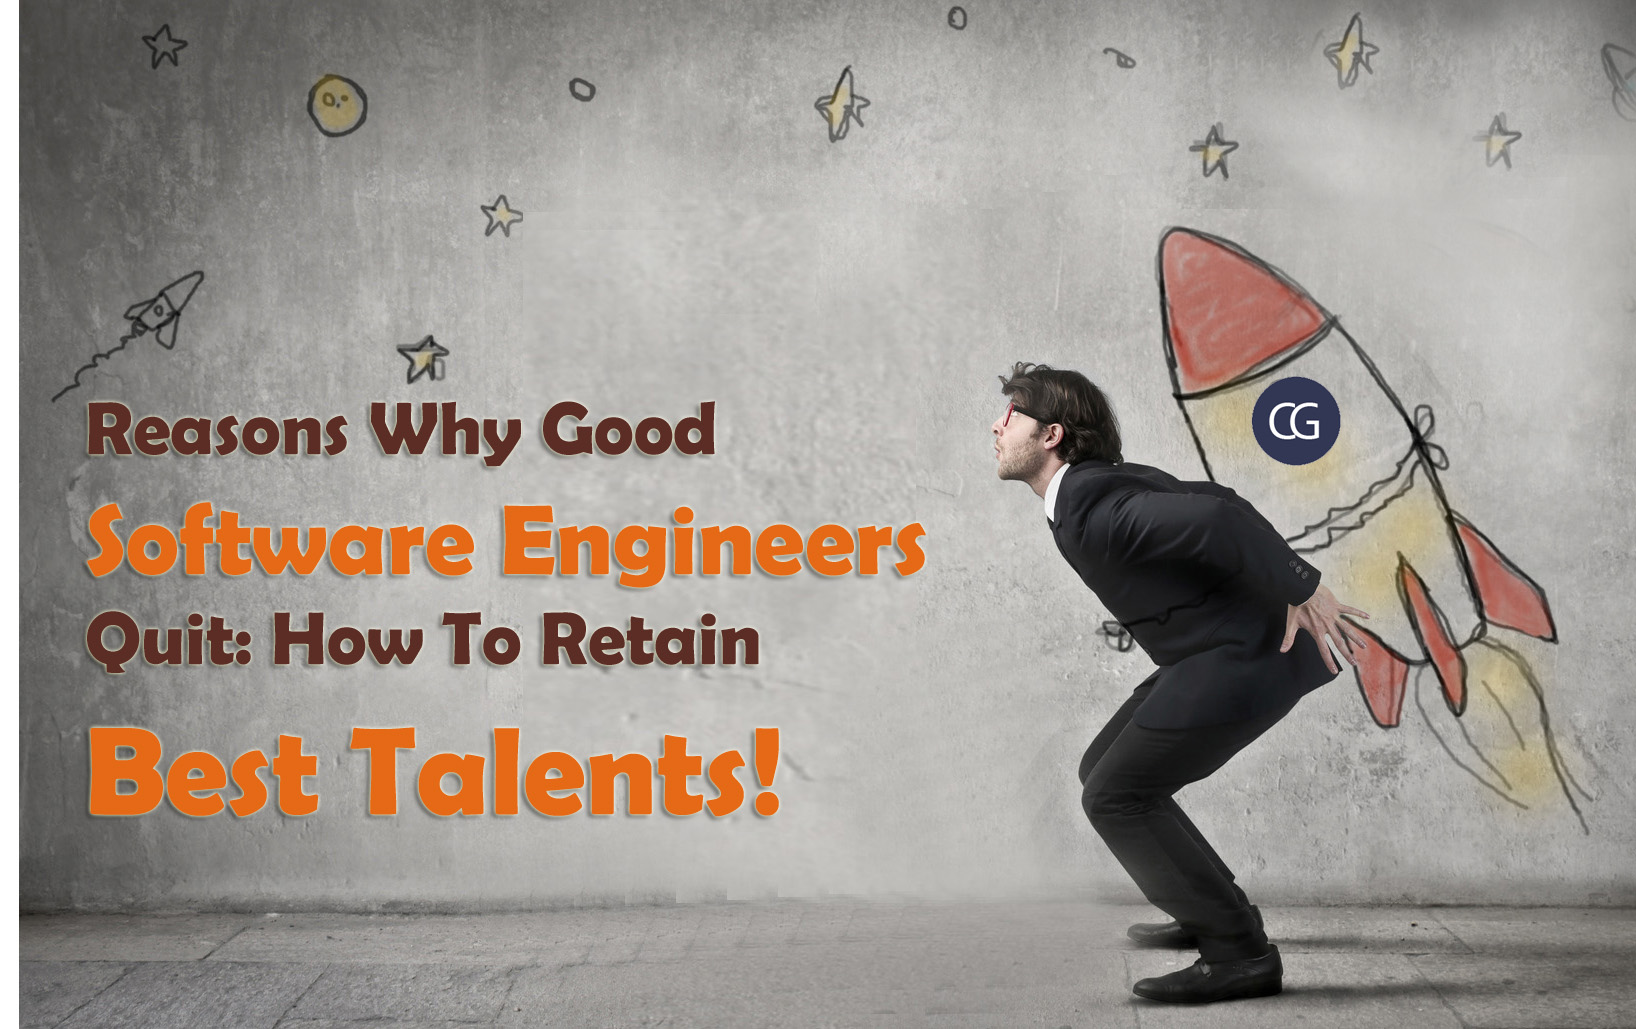 Reasons Why Good Software Engineers Quit: How To Retain Best Talents!